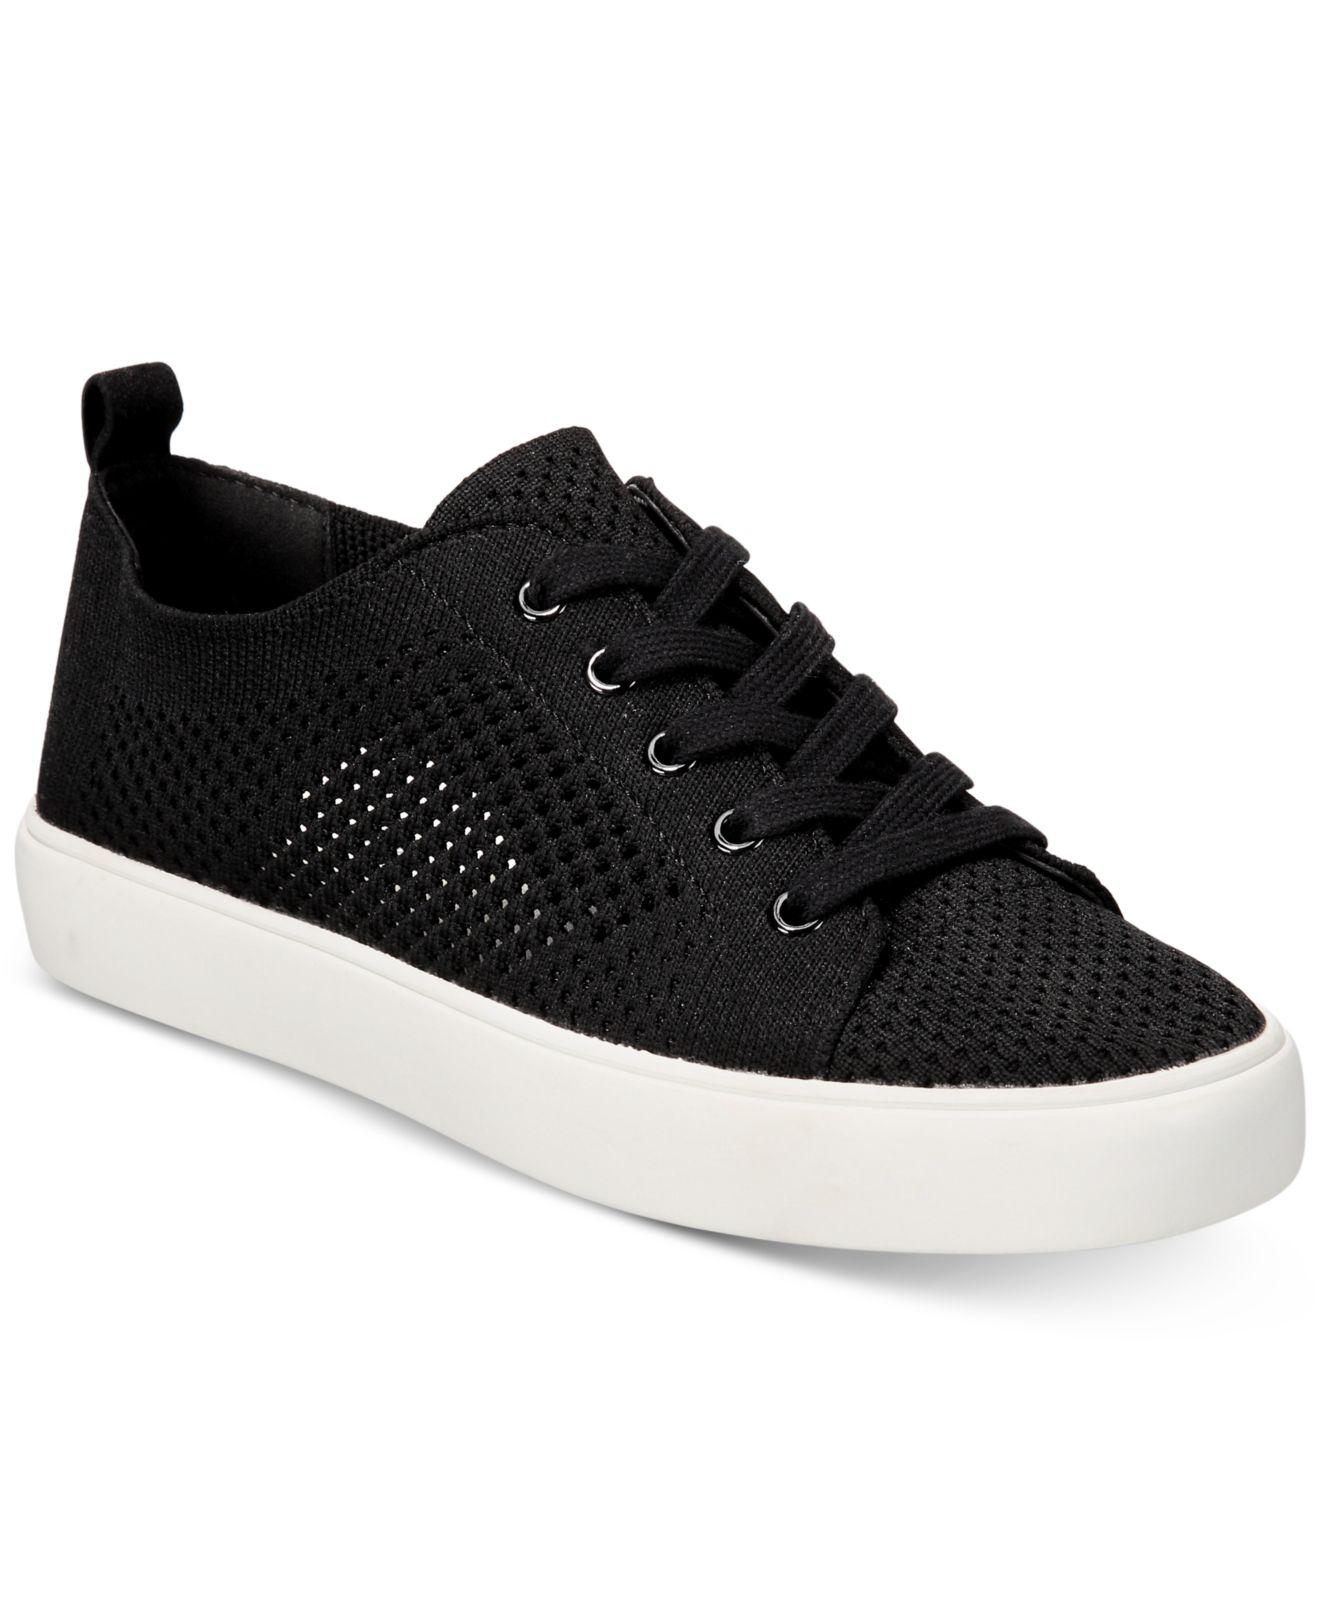 Marc Fisher Sashya Perforated Knit Sneaker in Black - Lyst